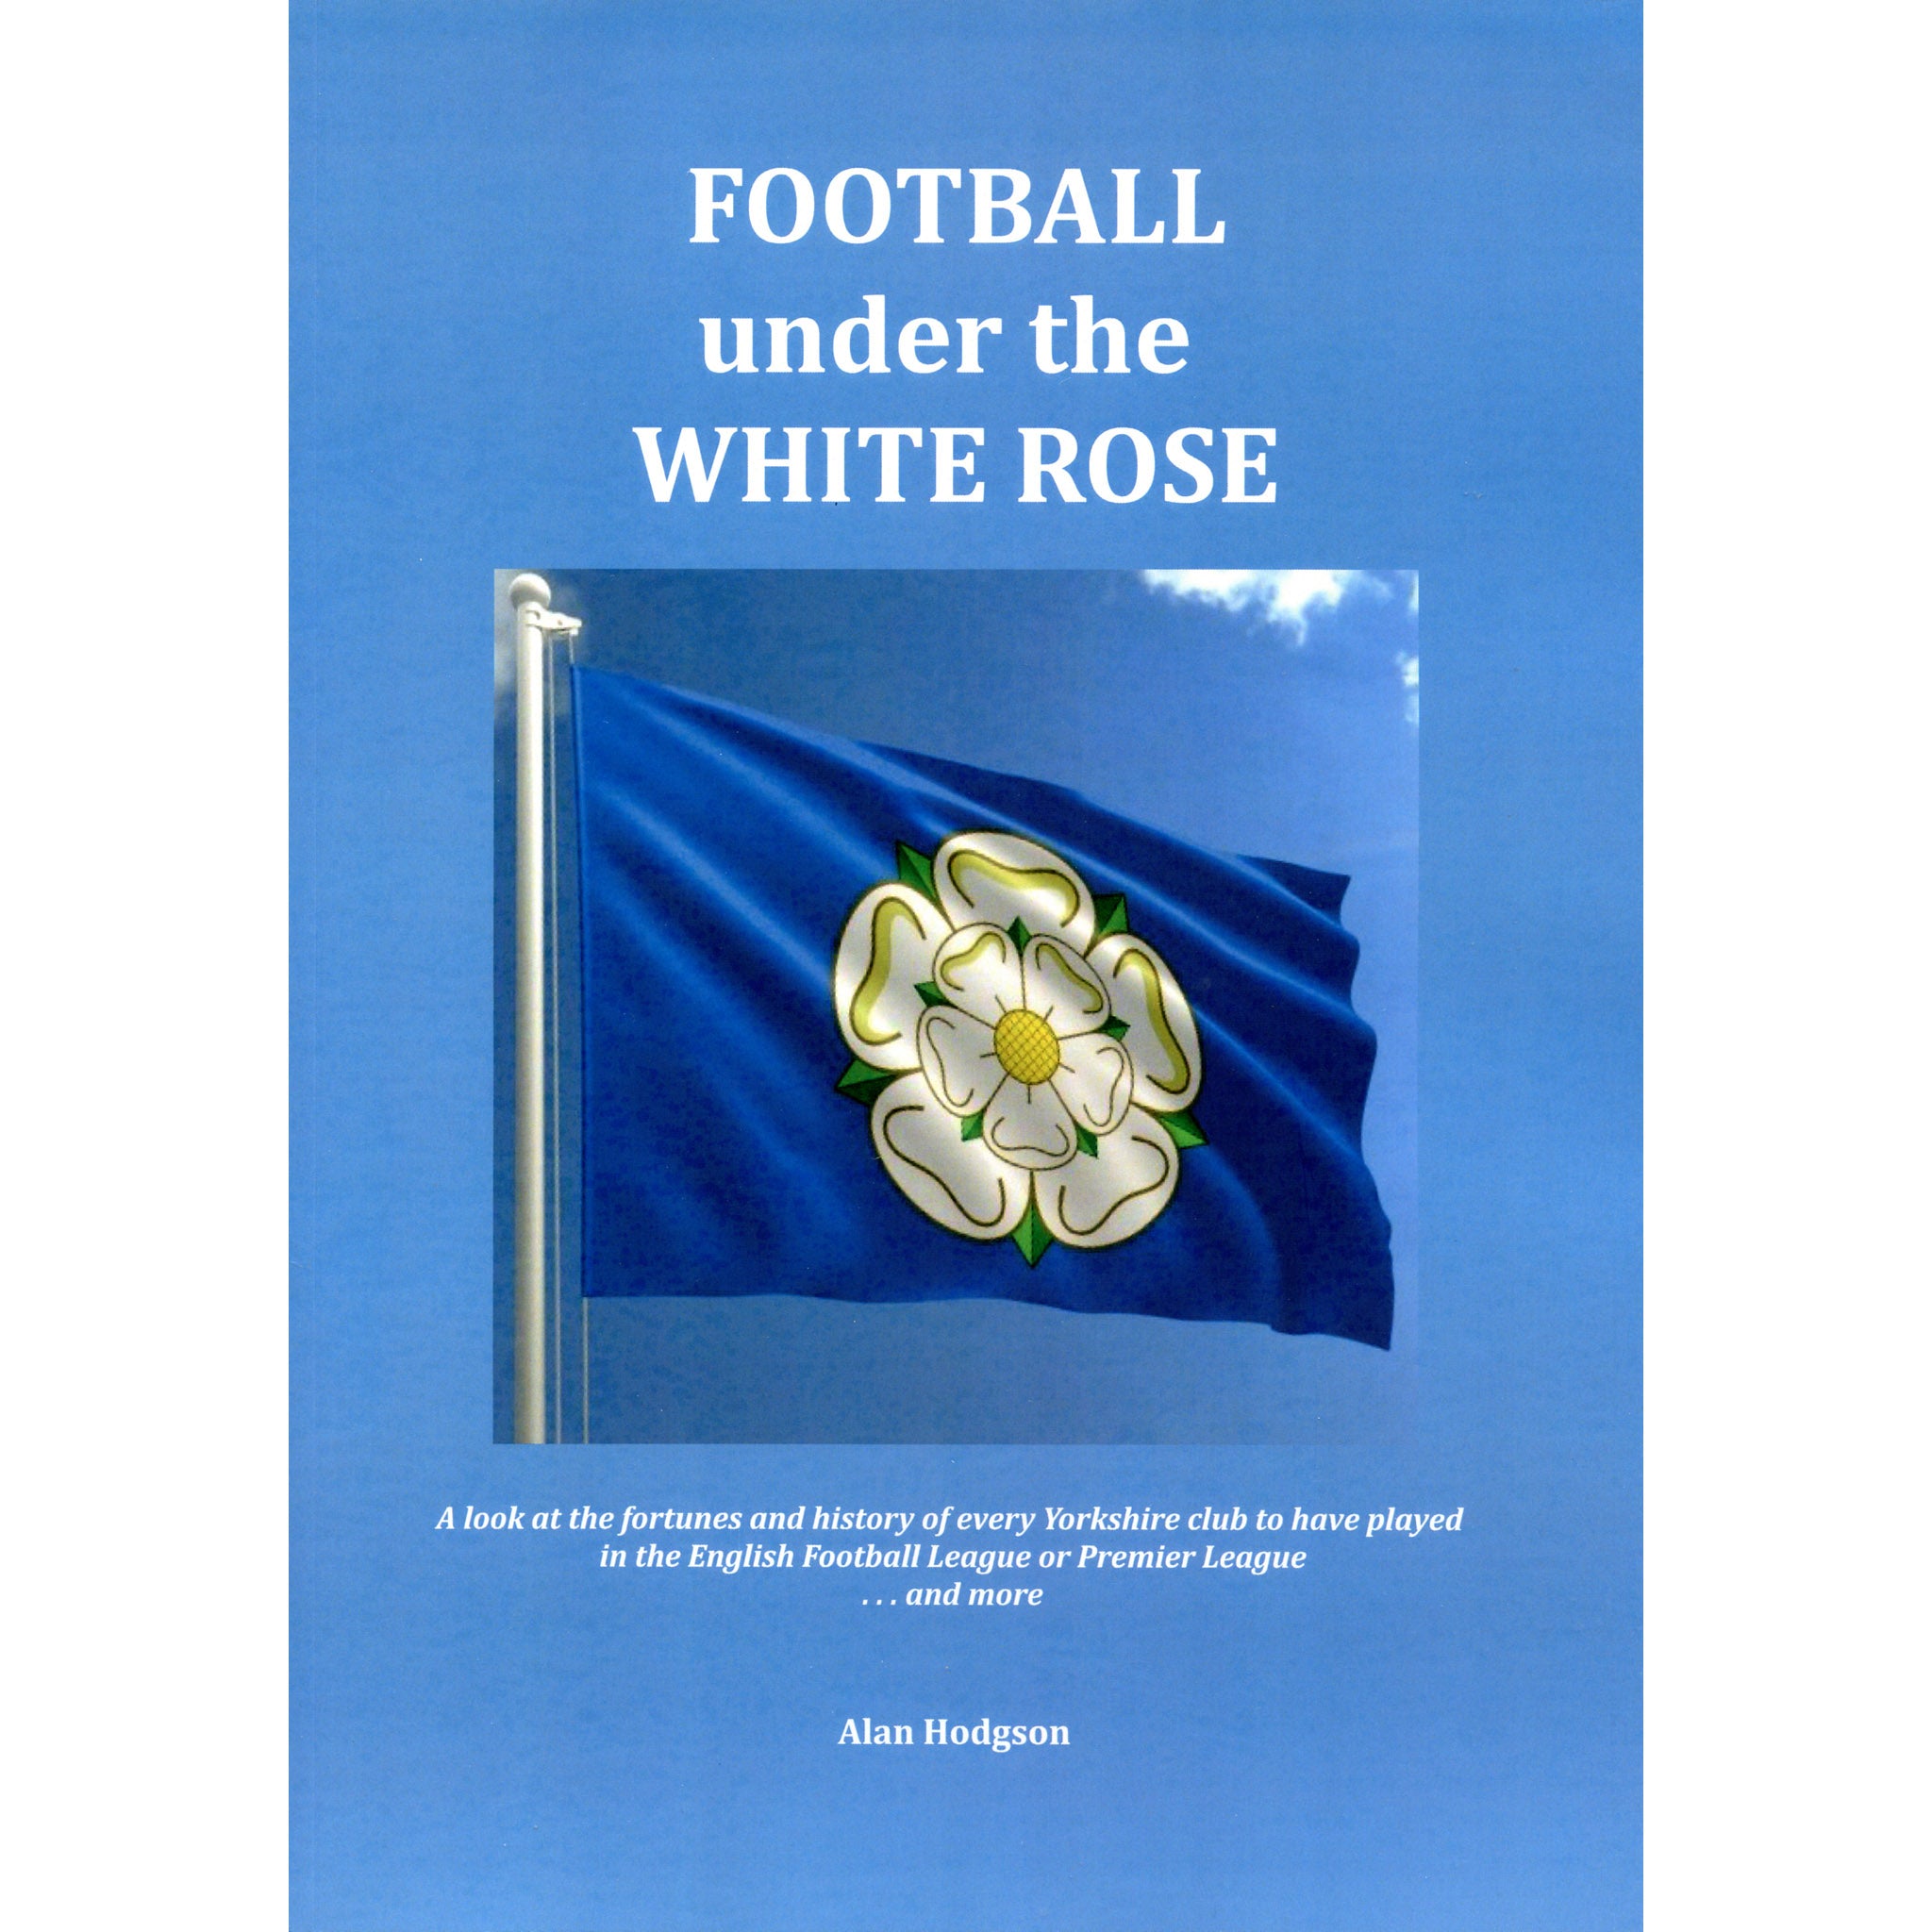 Football under the White Rose – Yorkshire Football League and Premier League clubs